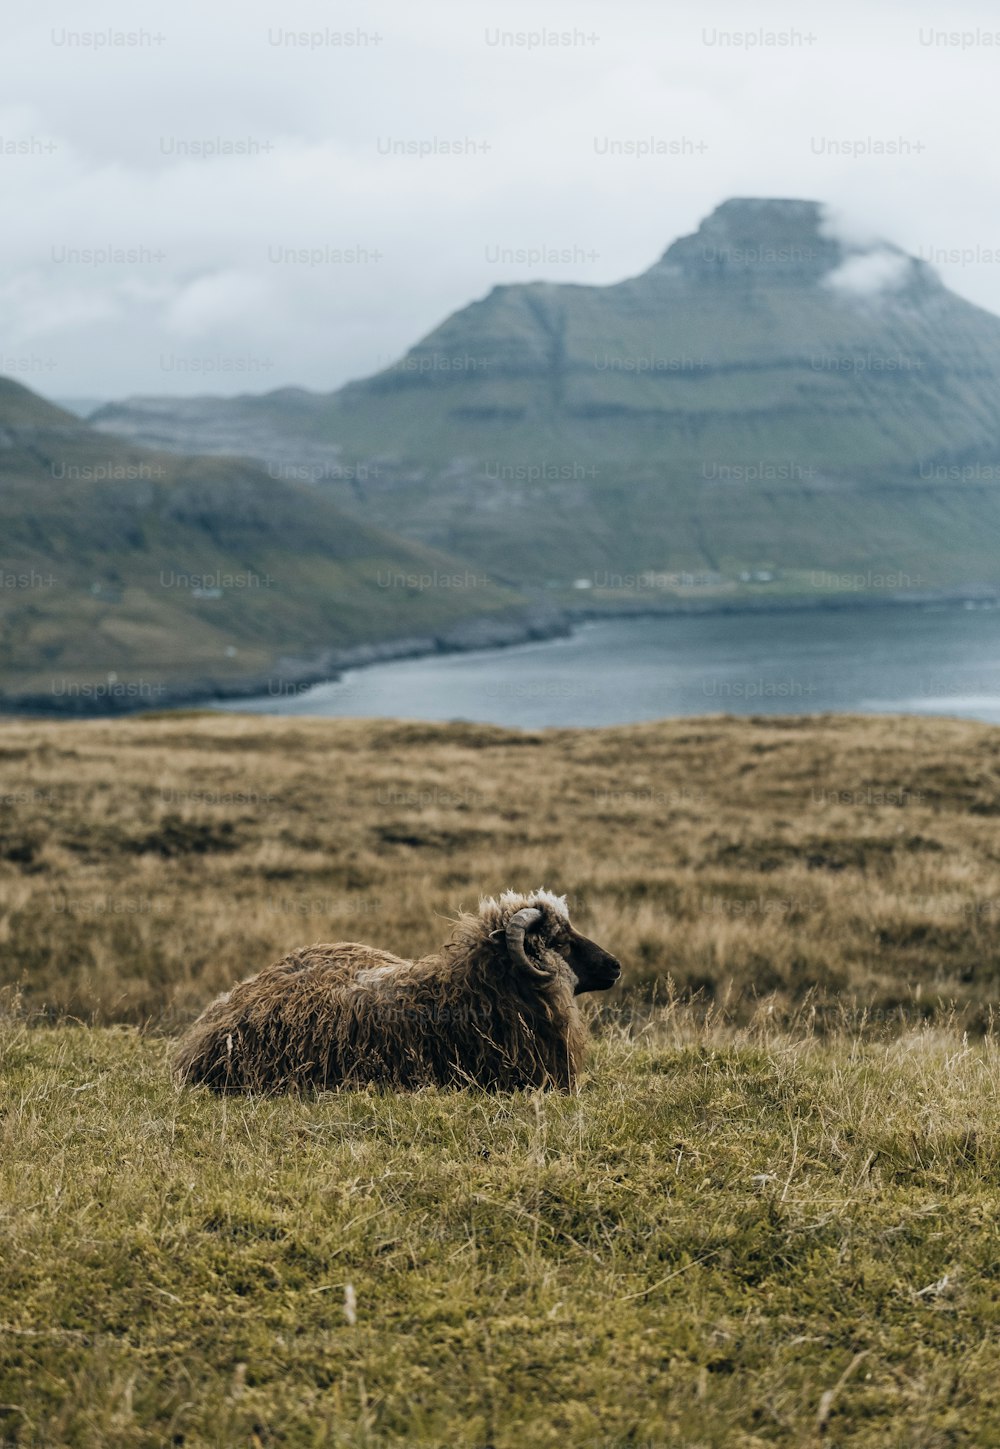 a sheep laying in a field with mountains in the background